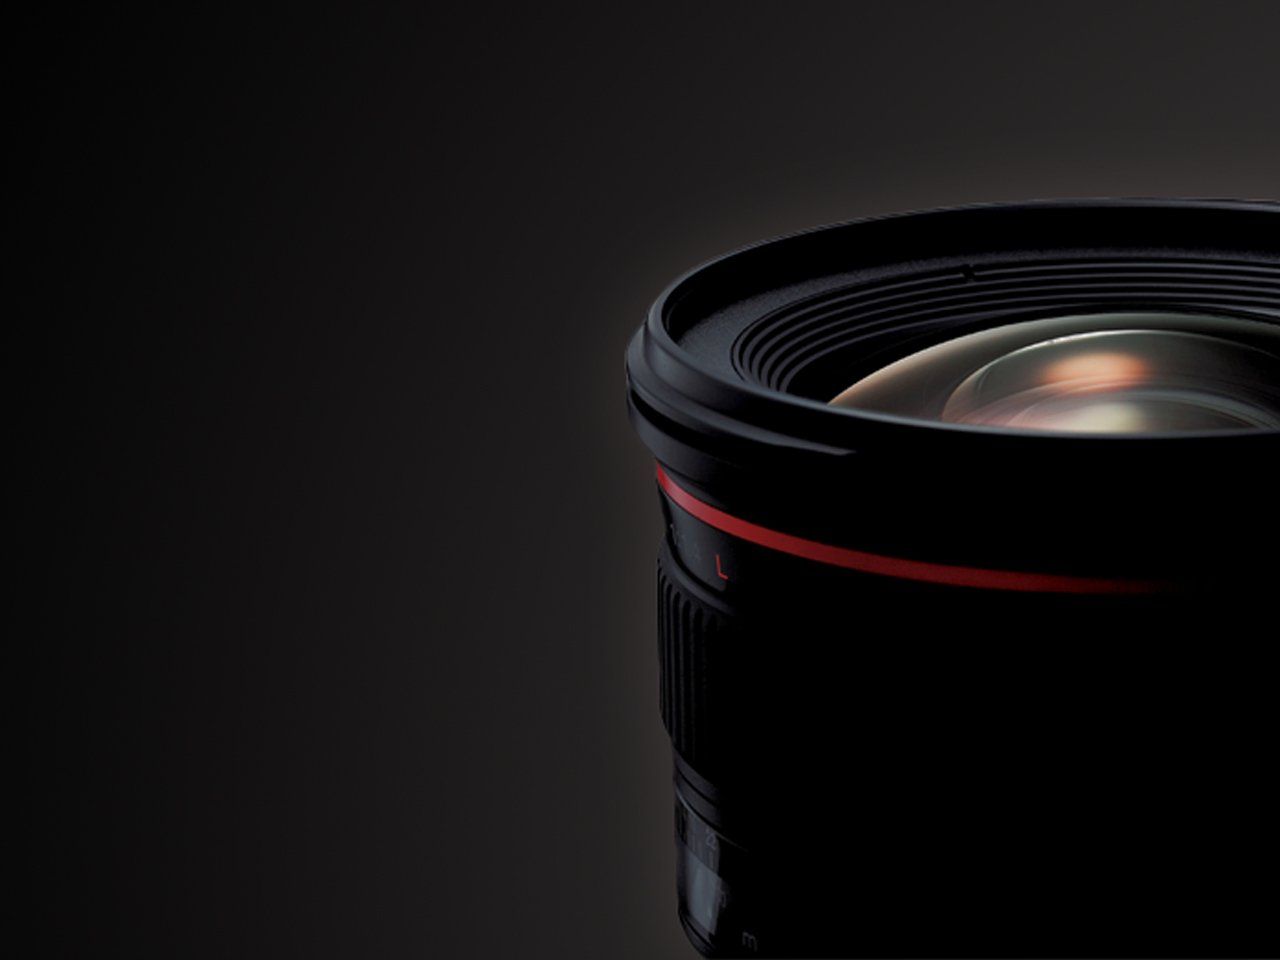 L-series EF Lenses have optical excellence in low light and tricky conditions.